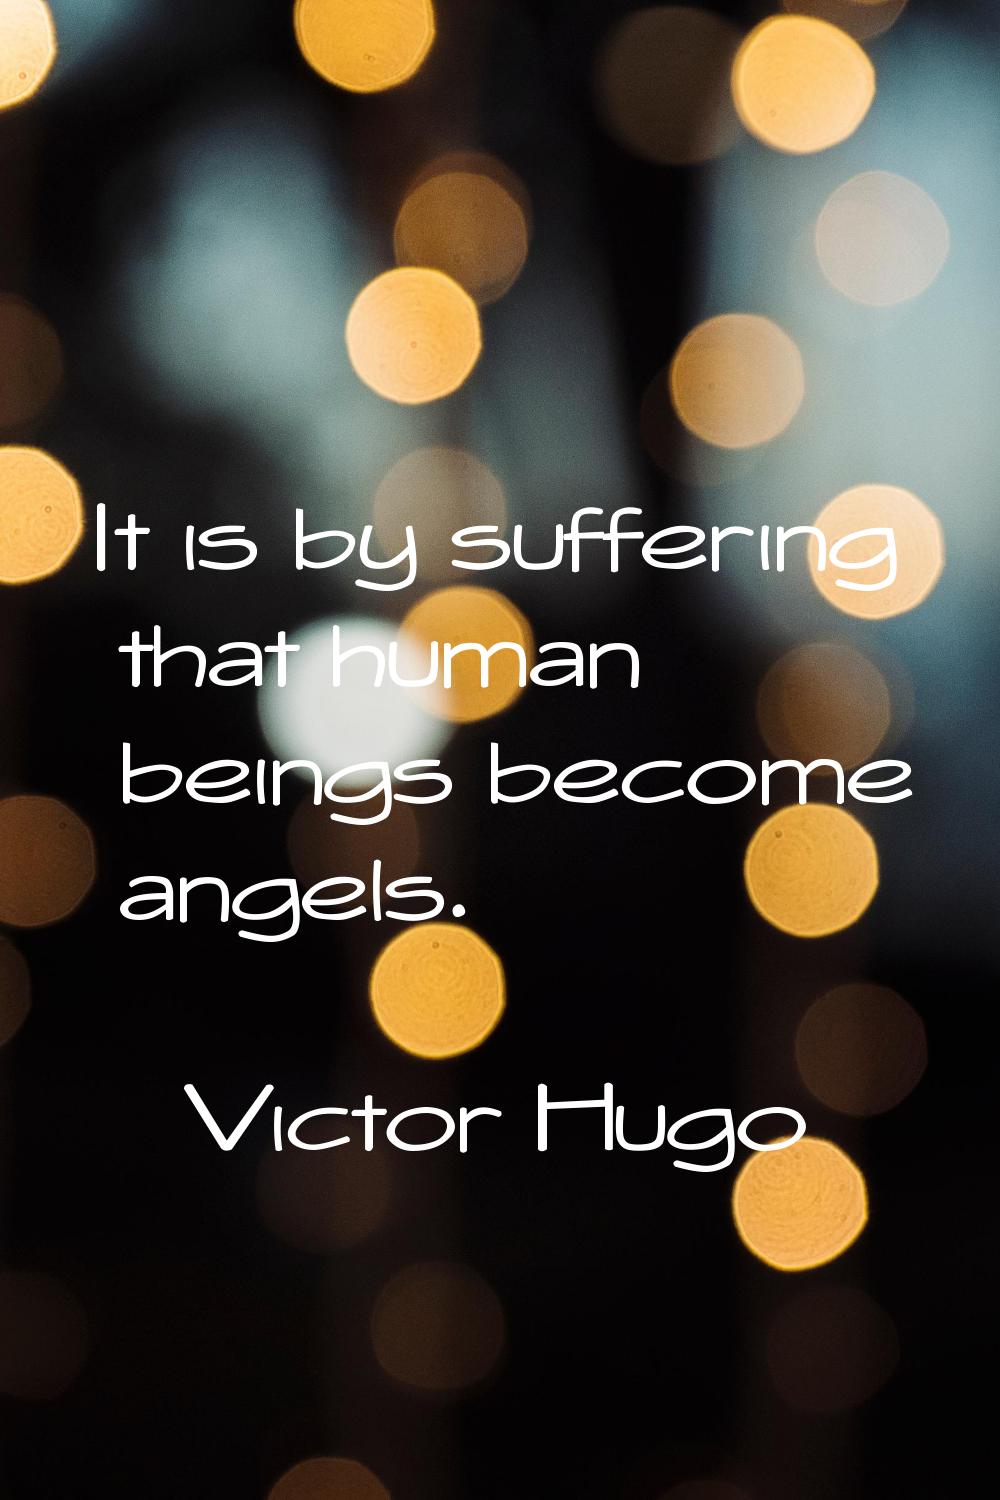 It is by suffering that human beings become angels.